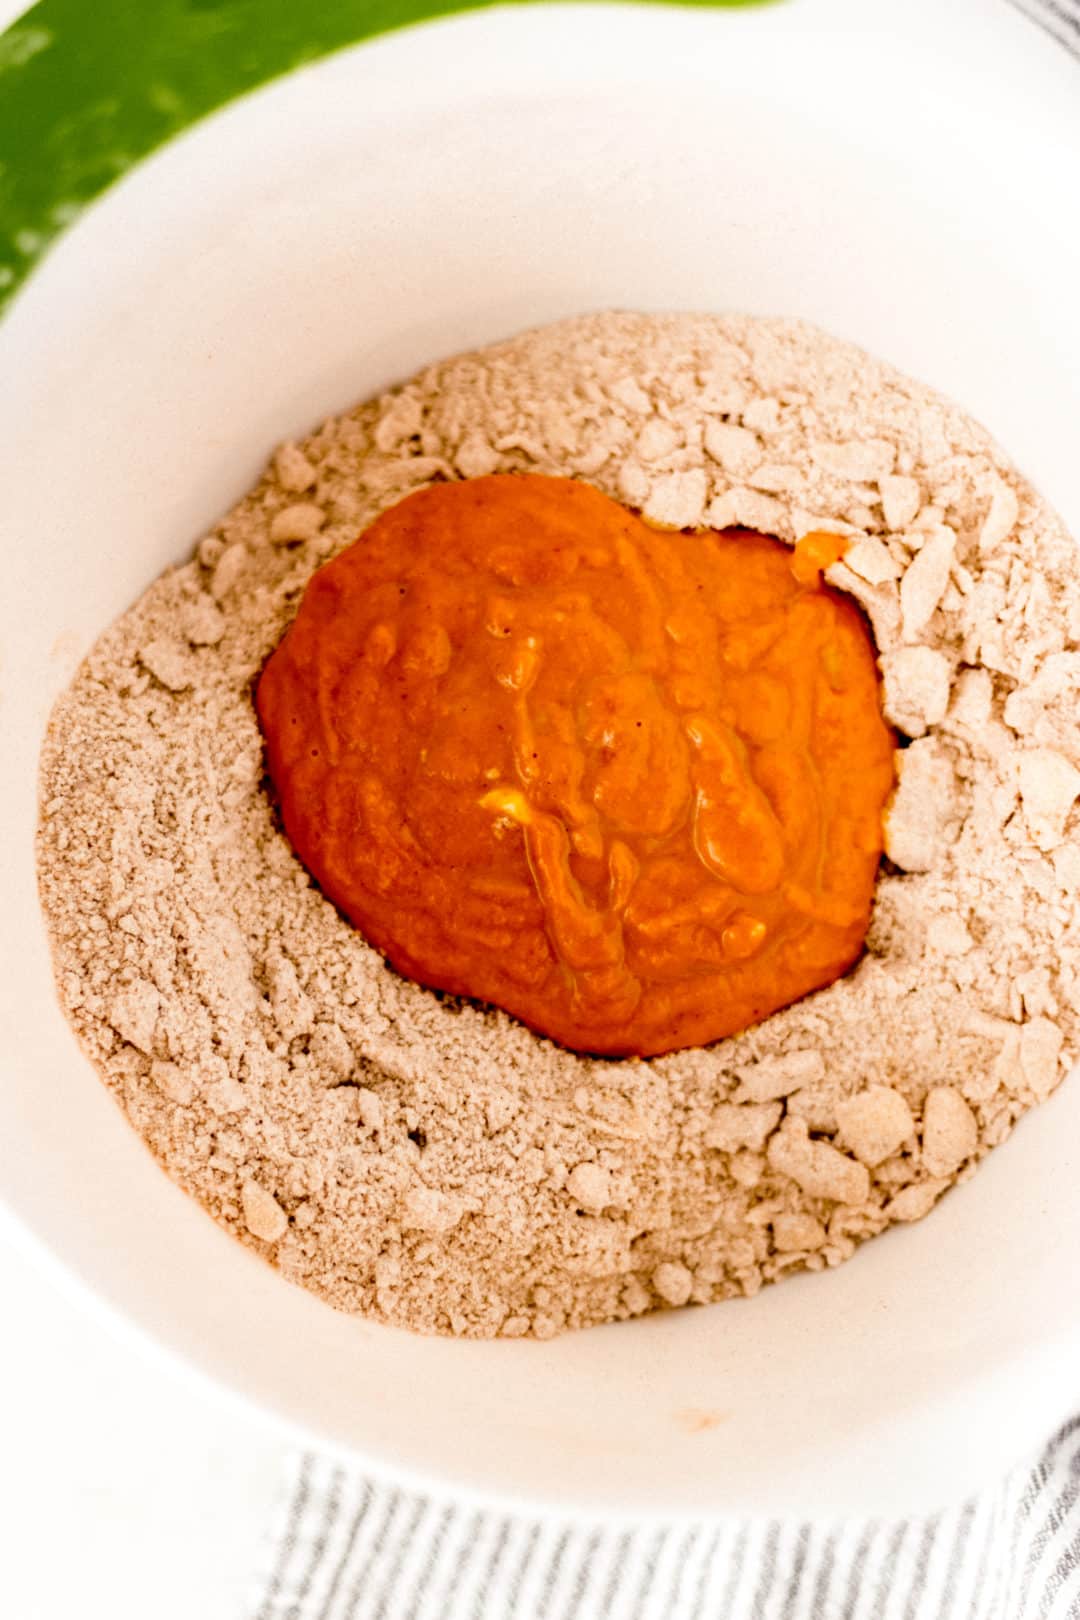 mixuture of ingredients for pumpkin scones in a mixing bowl